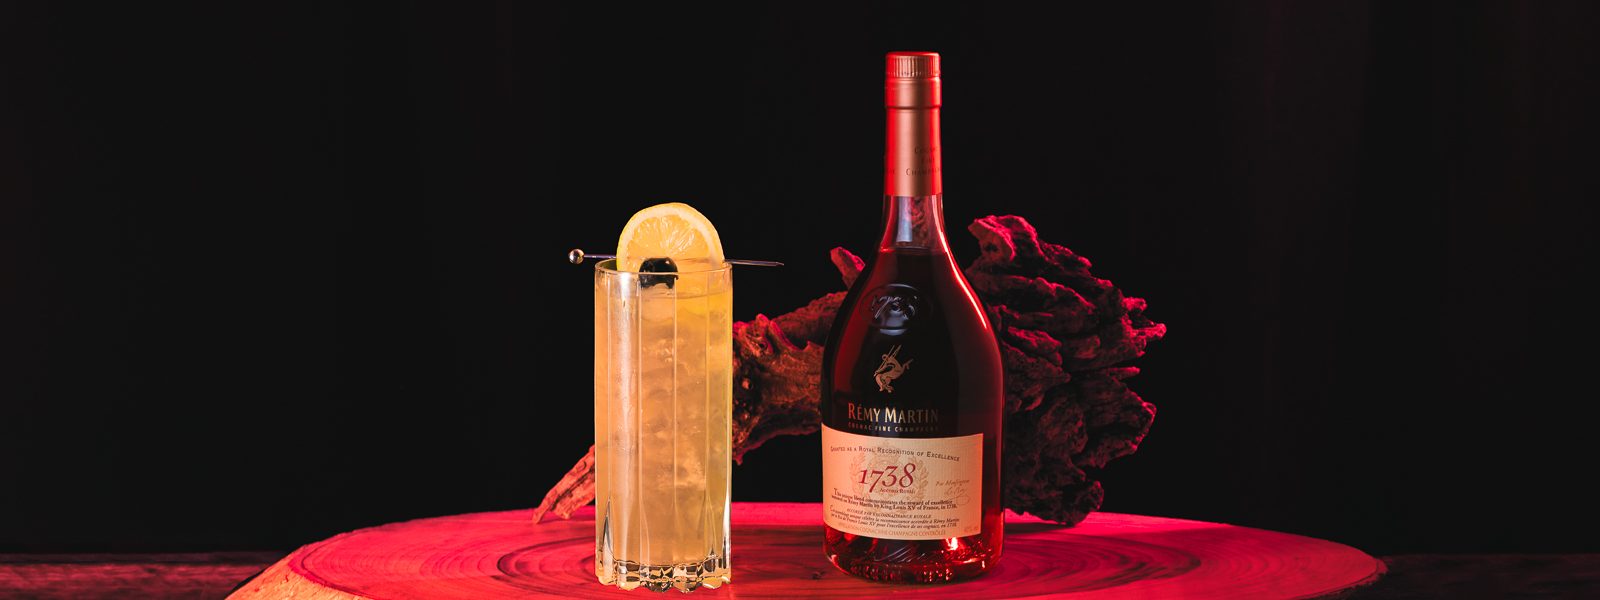 Rémy Martin 1738 Royal Collins in a highball glass with Remy Martin bottle